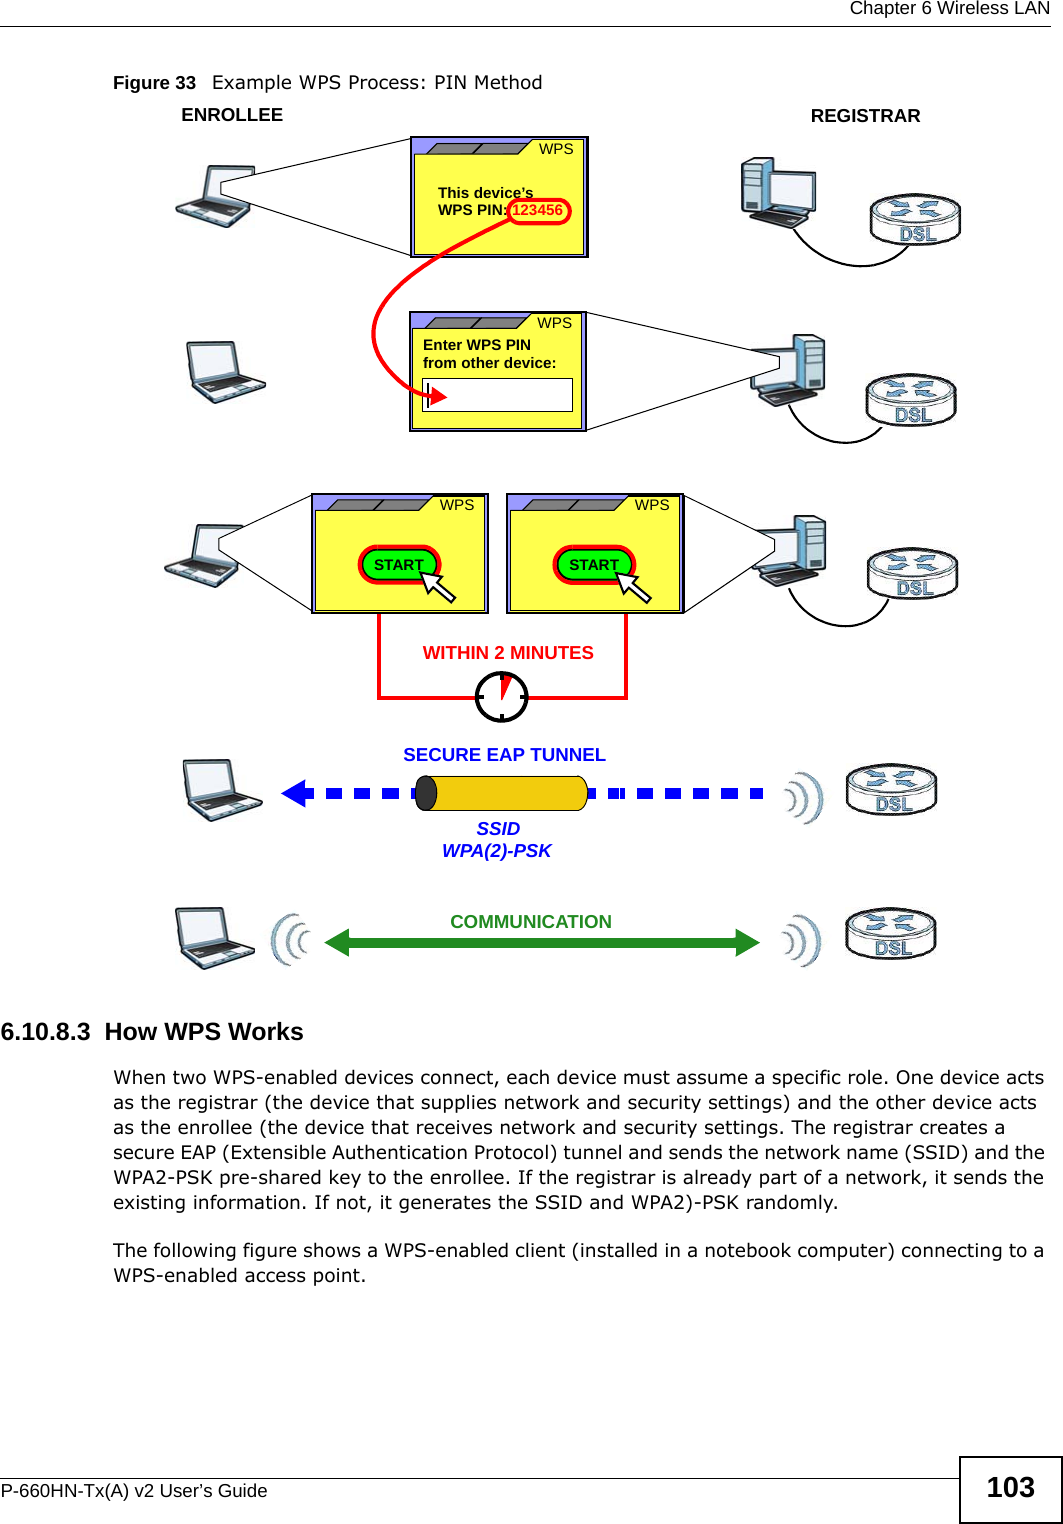  Chapter 6 Wireless LANP-660HN-Tx(A) v2 User’s Guide 103Figure 33   Example WPS Process: PIN Method6.10.8.3  How WPS WorksWhen two WPS-enabled devices connect, each device must assume a specific role. One device acts as the registrar (the device that supplies network and security settings) and the other device acts as the enrollee (the device that receives network and security settings. The registrar creates a secure EAP (Extensible Authentication Protocol) tunnel and sends the network name (SSID) and the WPA2-PSK pre-shared key to the enrollee. If the registrar is already part of a network, it sends the existing information. If not, it generates the SSID and WPA2)-PSK randomly.The following figure shows a WPS-enabled client (installed in a notebook computer) connecting to a WPS-enabled access point.ENROLLEESECURE EAP TUNNELSSIDWPA(2)-PSKWITHIN 2 MINUTESCOMMUNICATIONThis device’s WPSEnter WPS PIN  WPSfrom other device: WPS PIN: 123456WPSSTARTWPSSTARTREGISTRAR